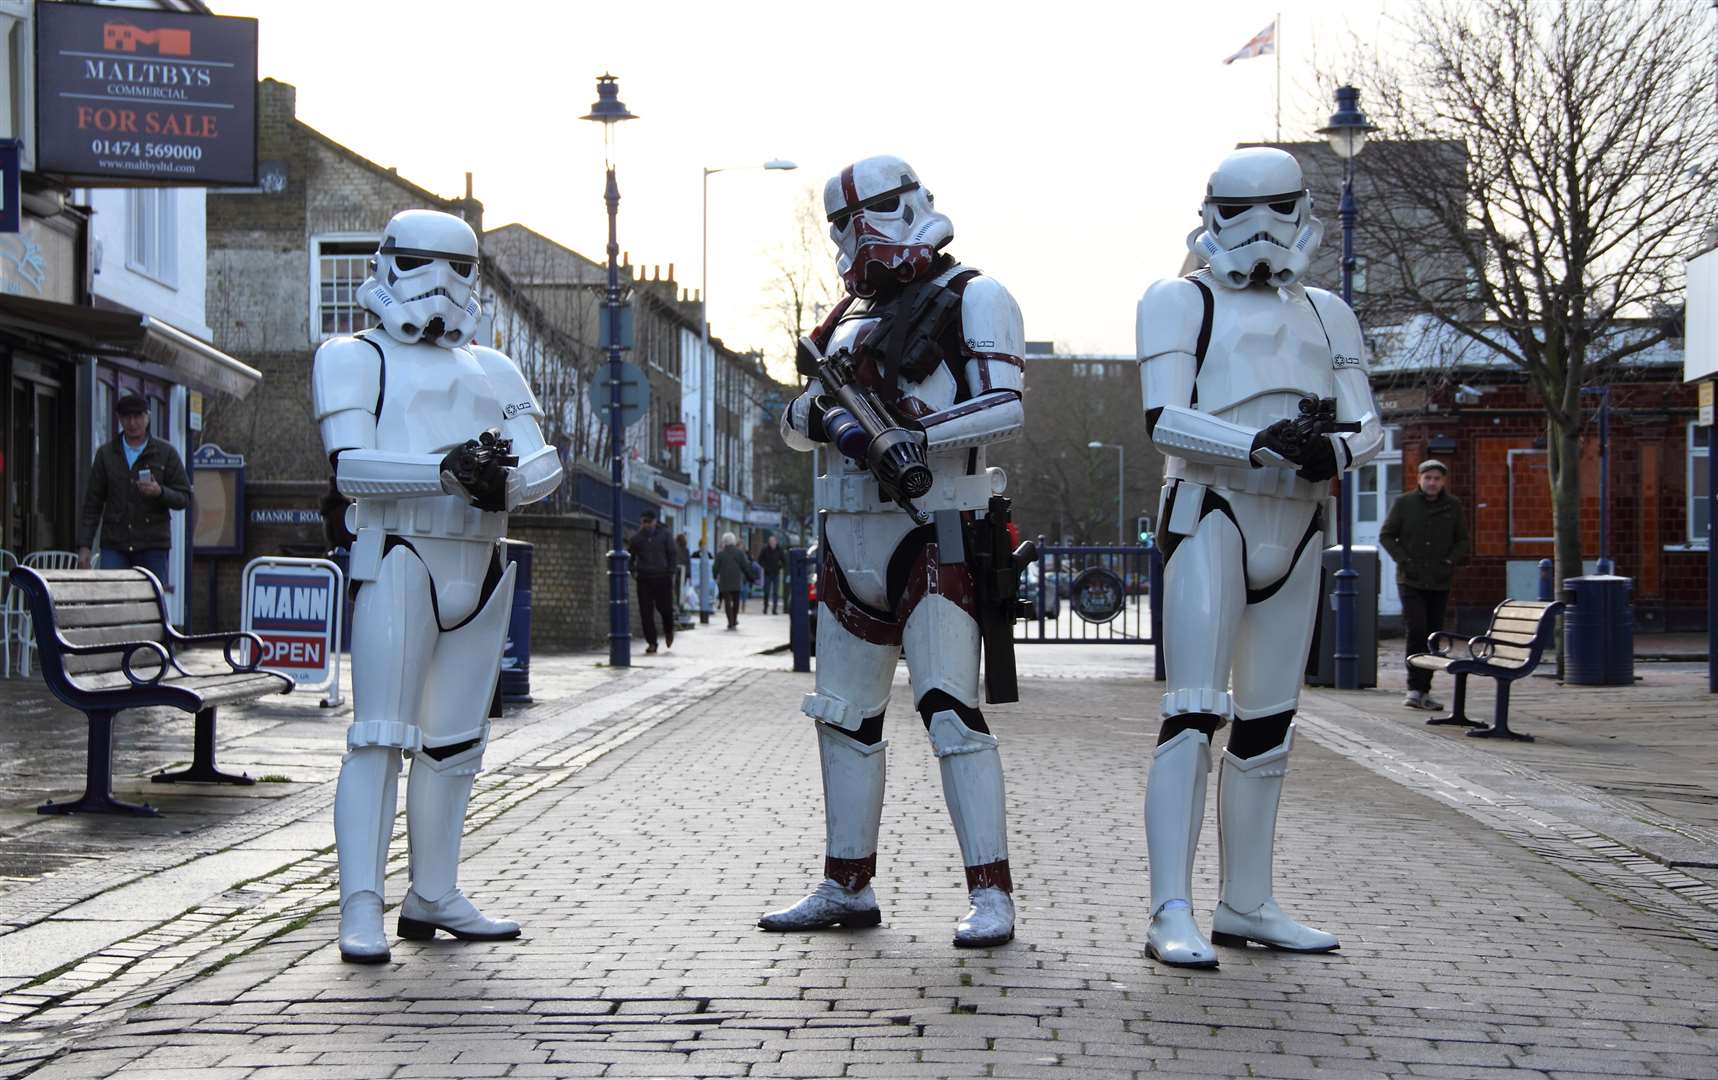 Stormtroopers invaded the town to promote the screening of Star Wars: The Force Awakens at The Paul Greengrass Cinema